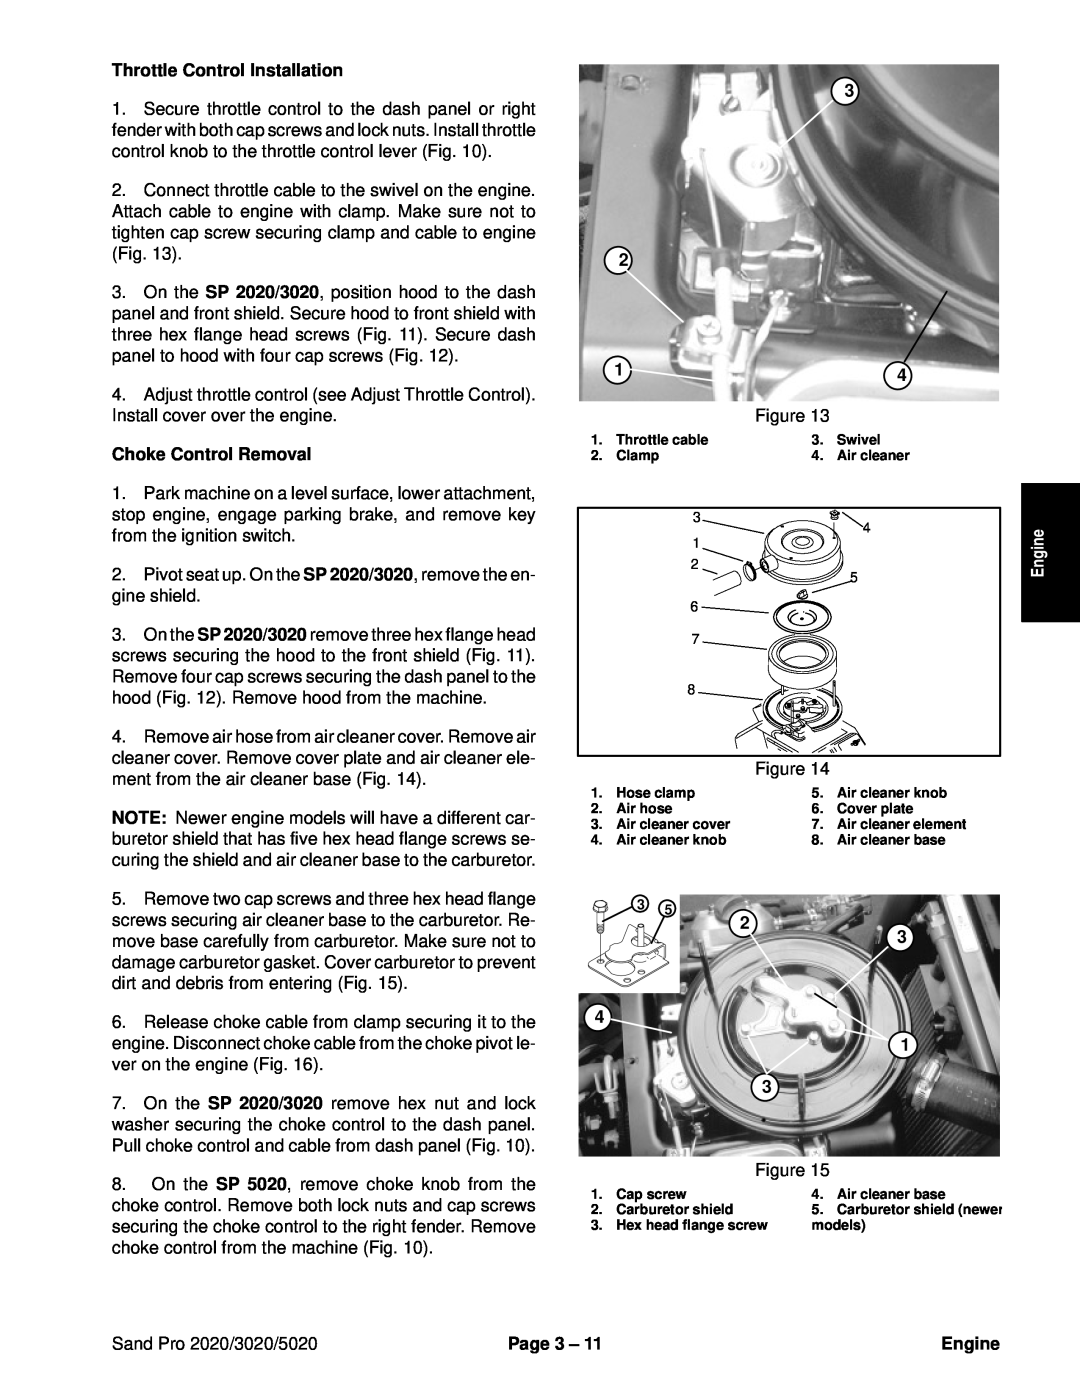 Toro service manual Throttle Control Installation, Choke Control Removal, Engine, Sand Pro 2020/3020/5020, Page 3 